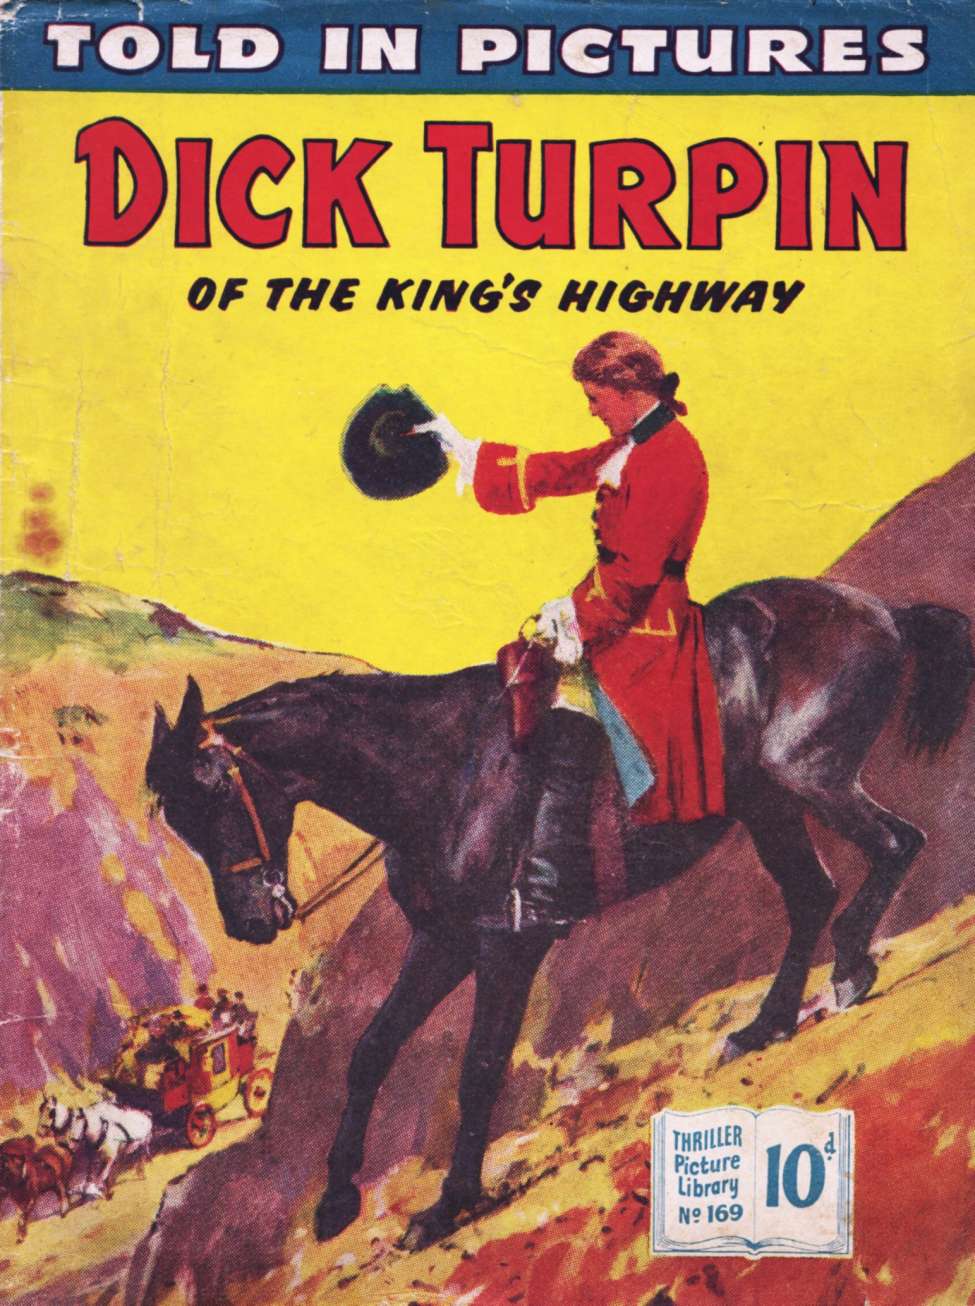 Book Cover For Thriller Picture Library 169 - Dick Turpin of the King's Highway